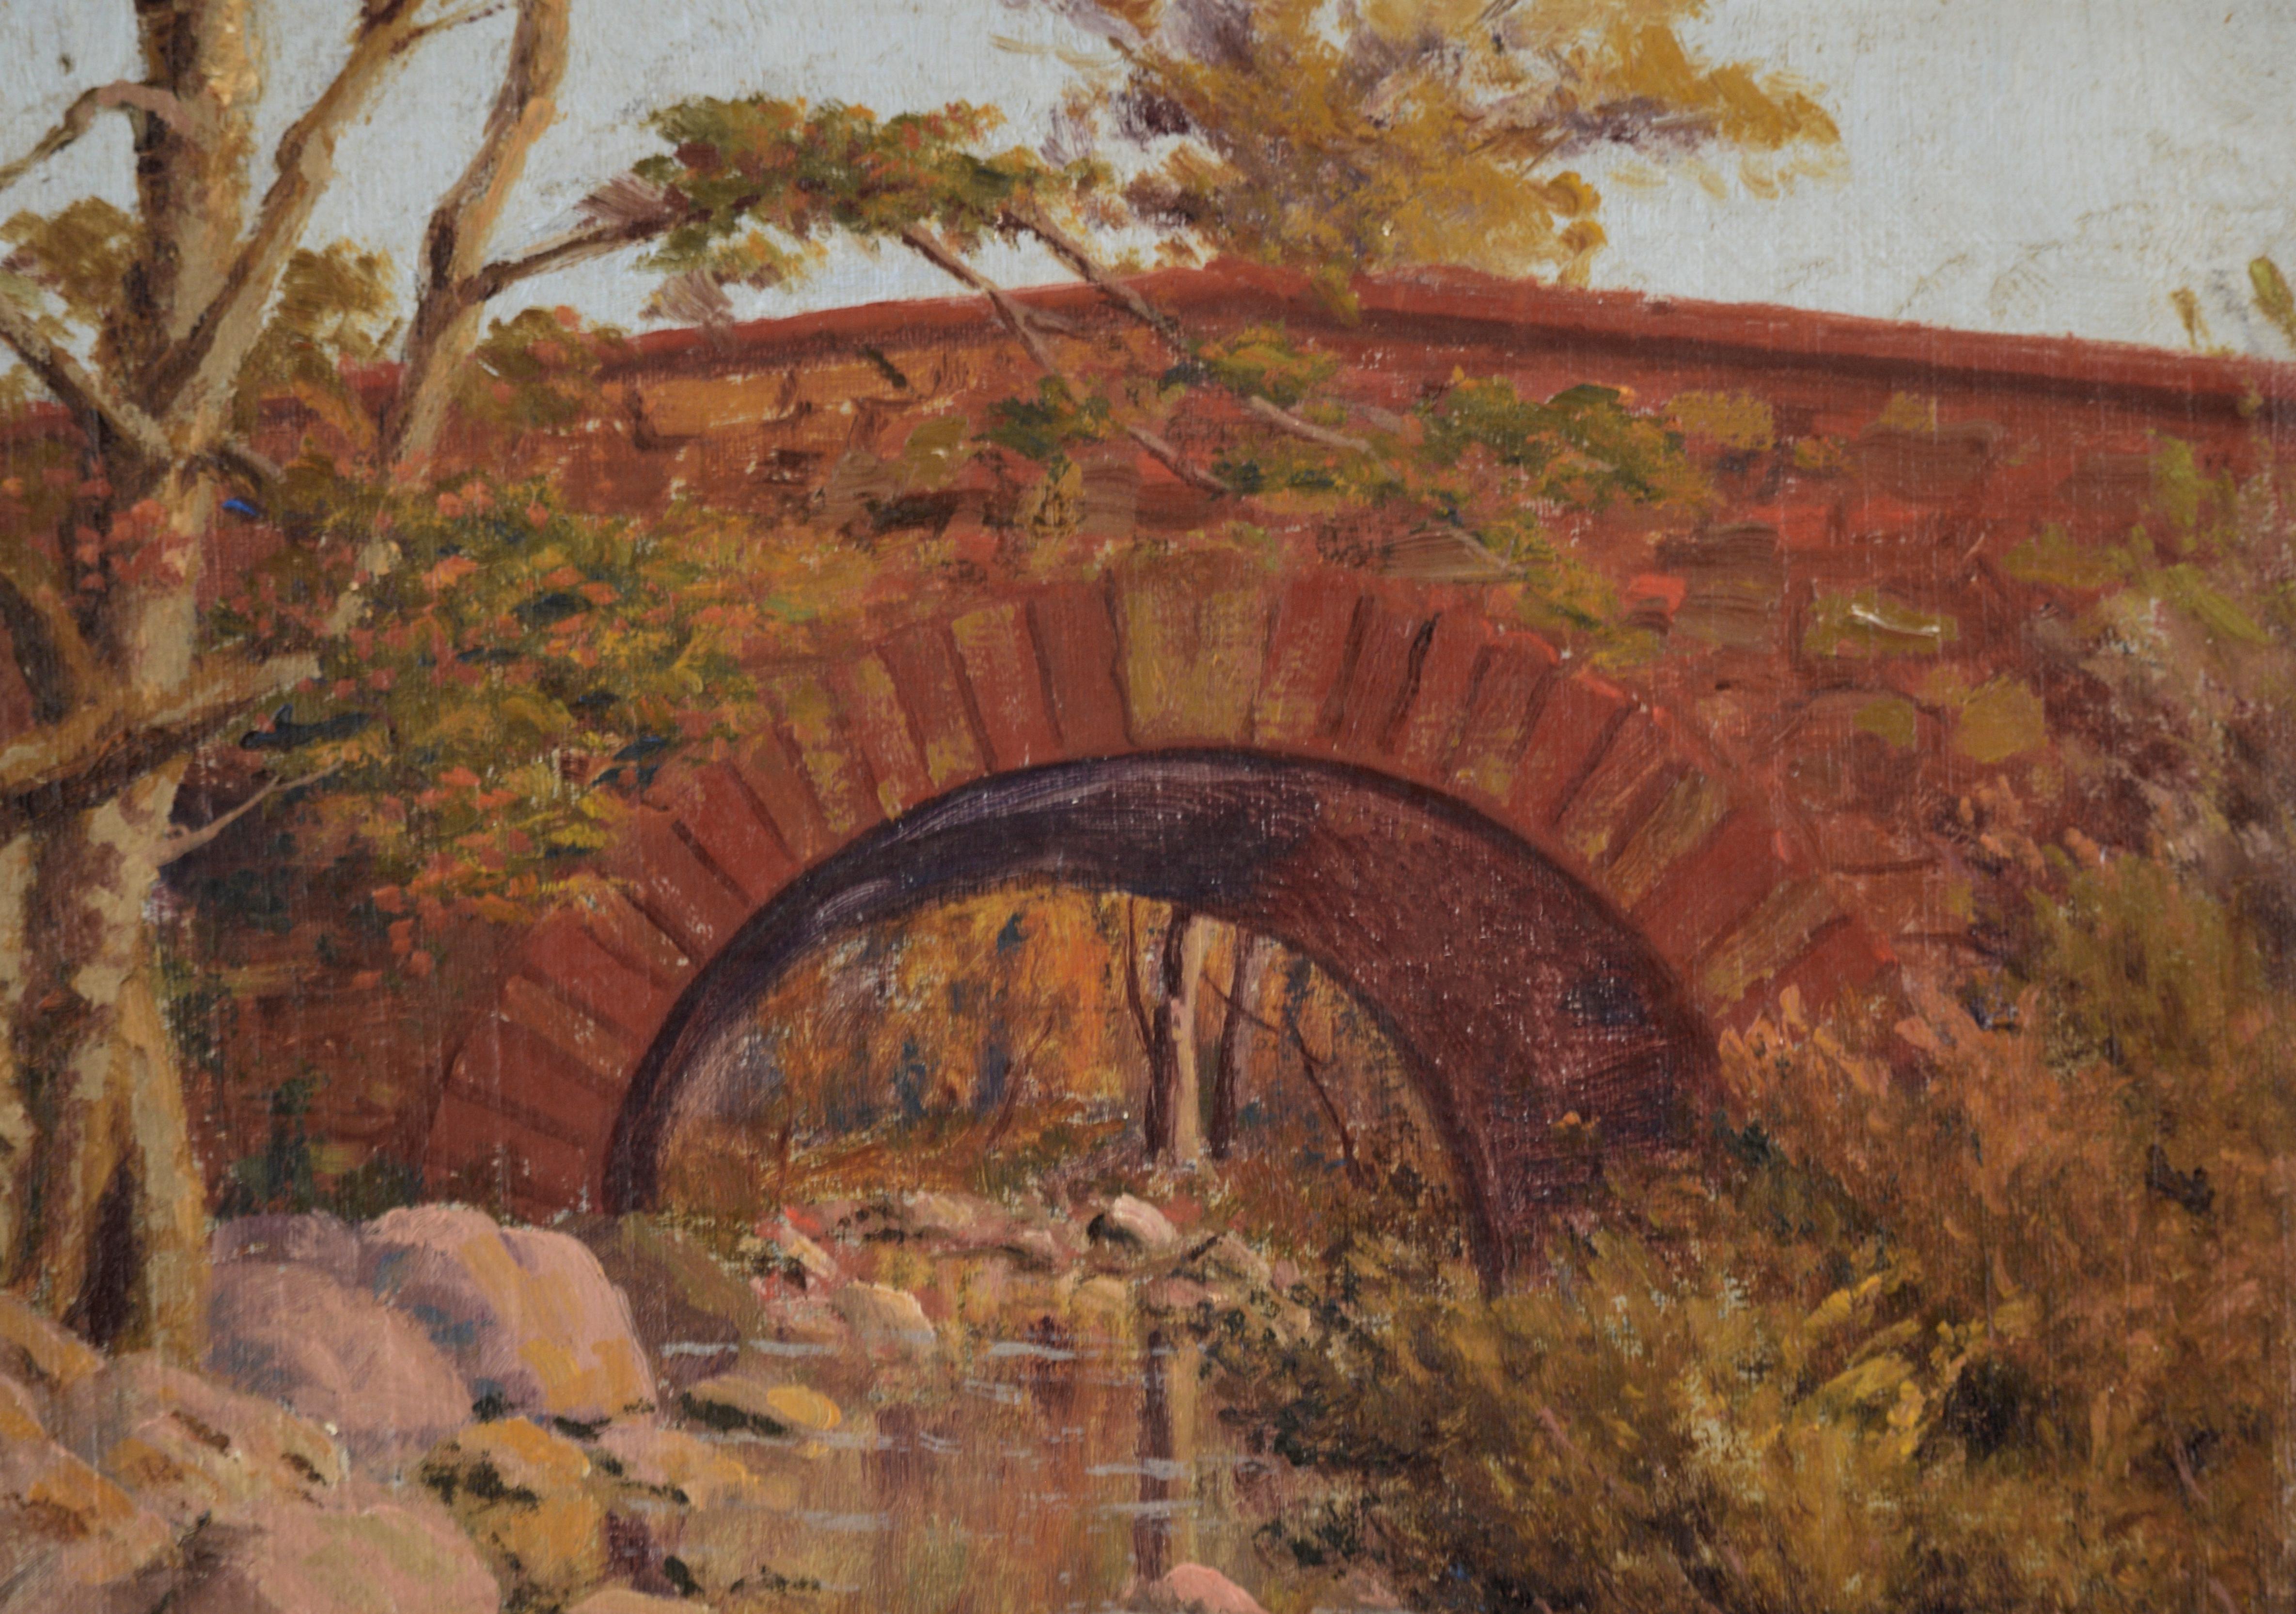 Serene landscape of the Putah Creek Bridge (now submerged, also known as Monticello Bridge) by Frank Willson Judd (American, 1864-1940). The Putah Creeks flows beneath an old Closed-spandrel red stone arch bridge 1896-1957 submerged intact beneath